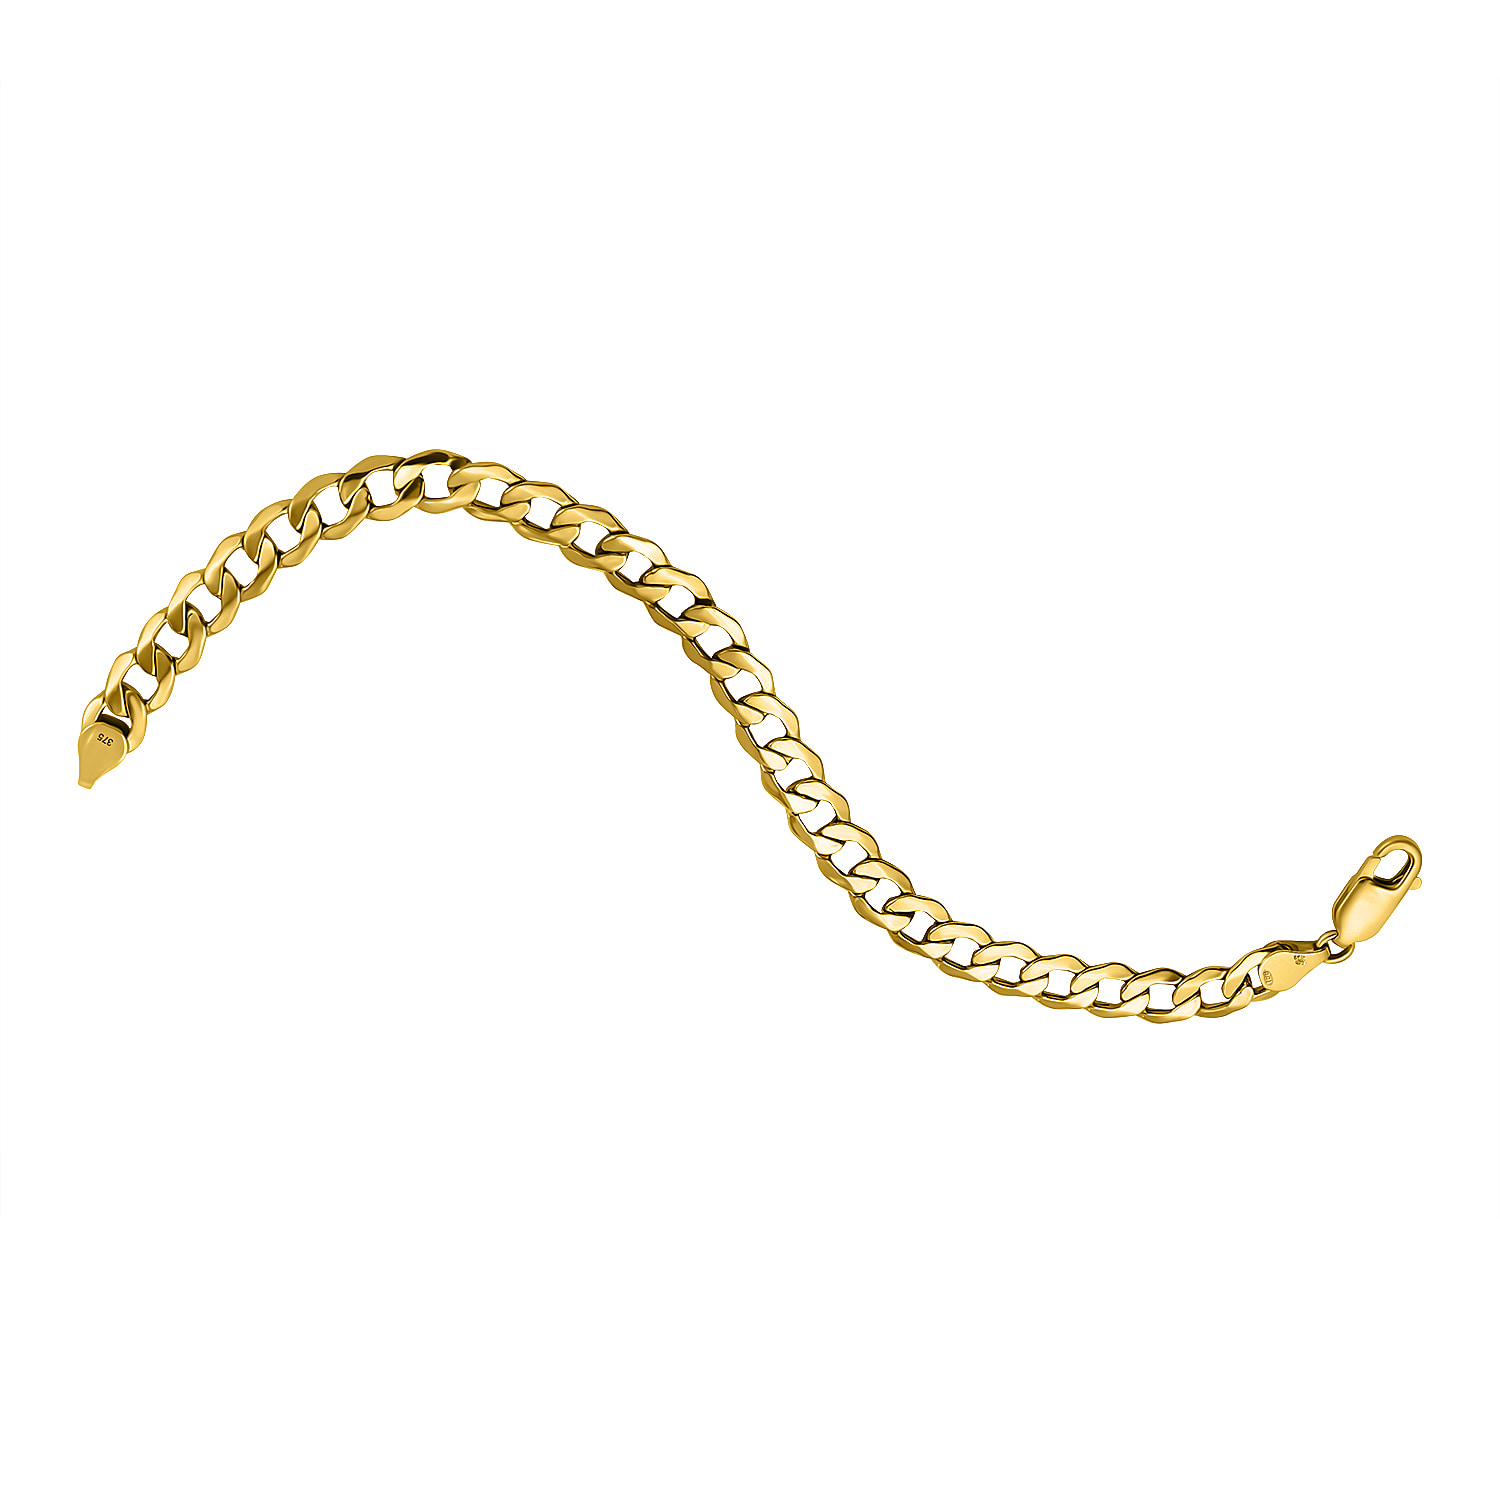 Italian Made Closeout - 9K Yellow Gold 6 Sided Curb Bracelet (Size - 7.25), Gold Wt. 4.75 Gms